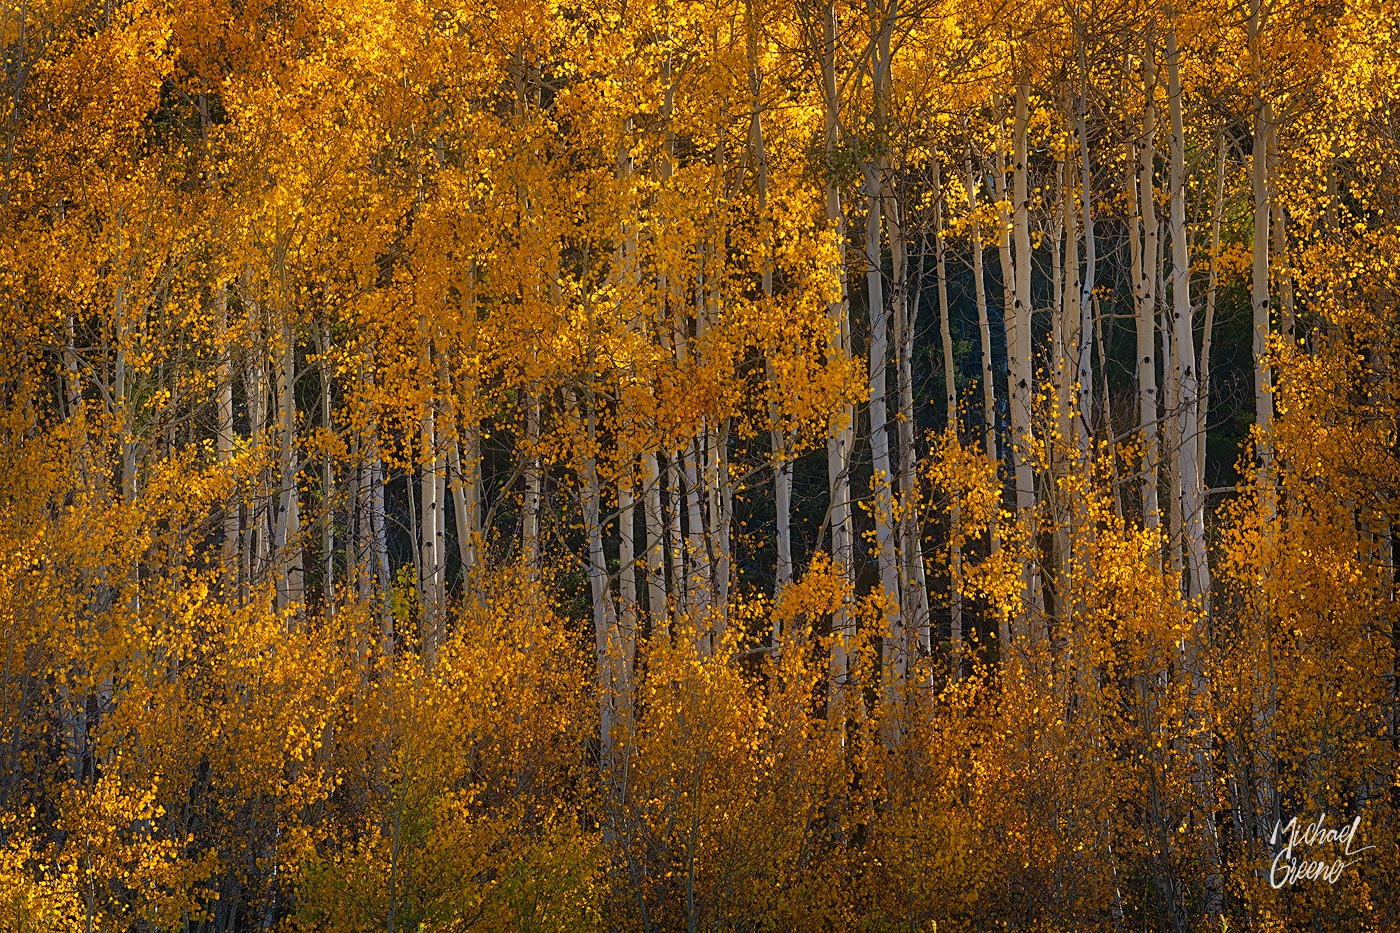 A flaming, backlit stand of aspens captured during an autumn morning drive in the South San Juan Wilderness near Platoro, CO....